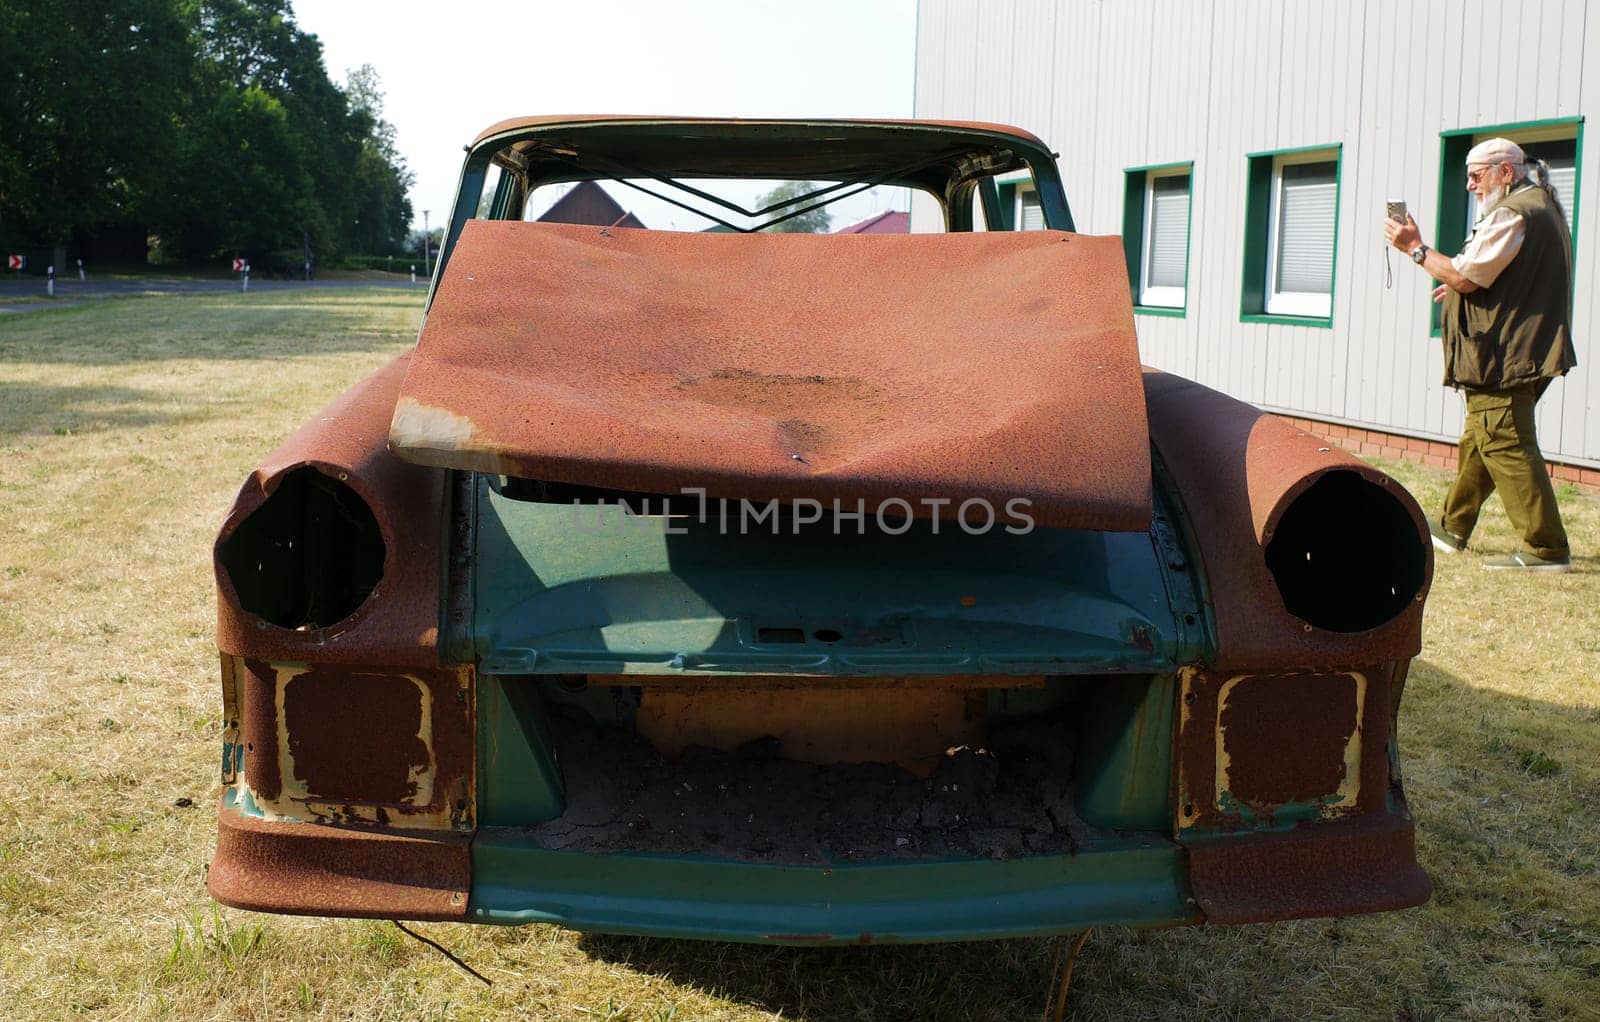 Front of a totally rusted old car with a man in the background photographing it